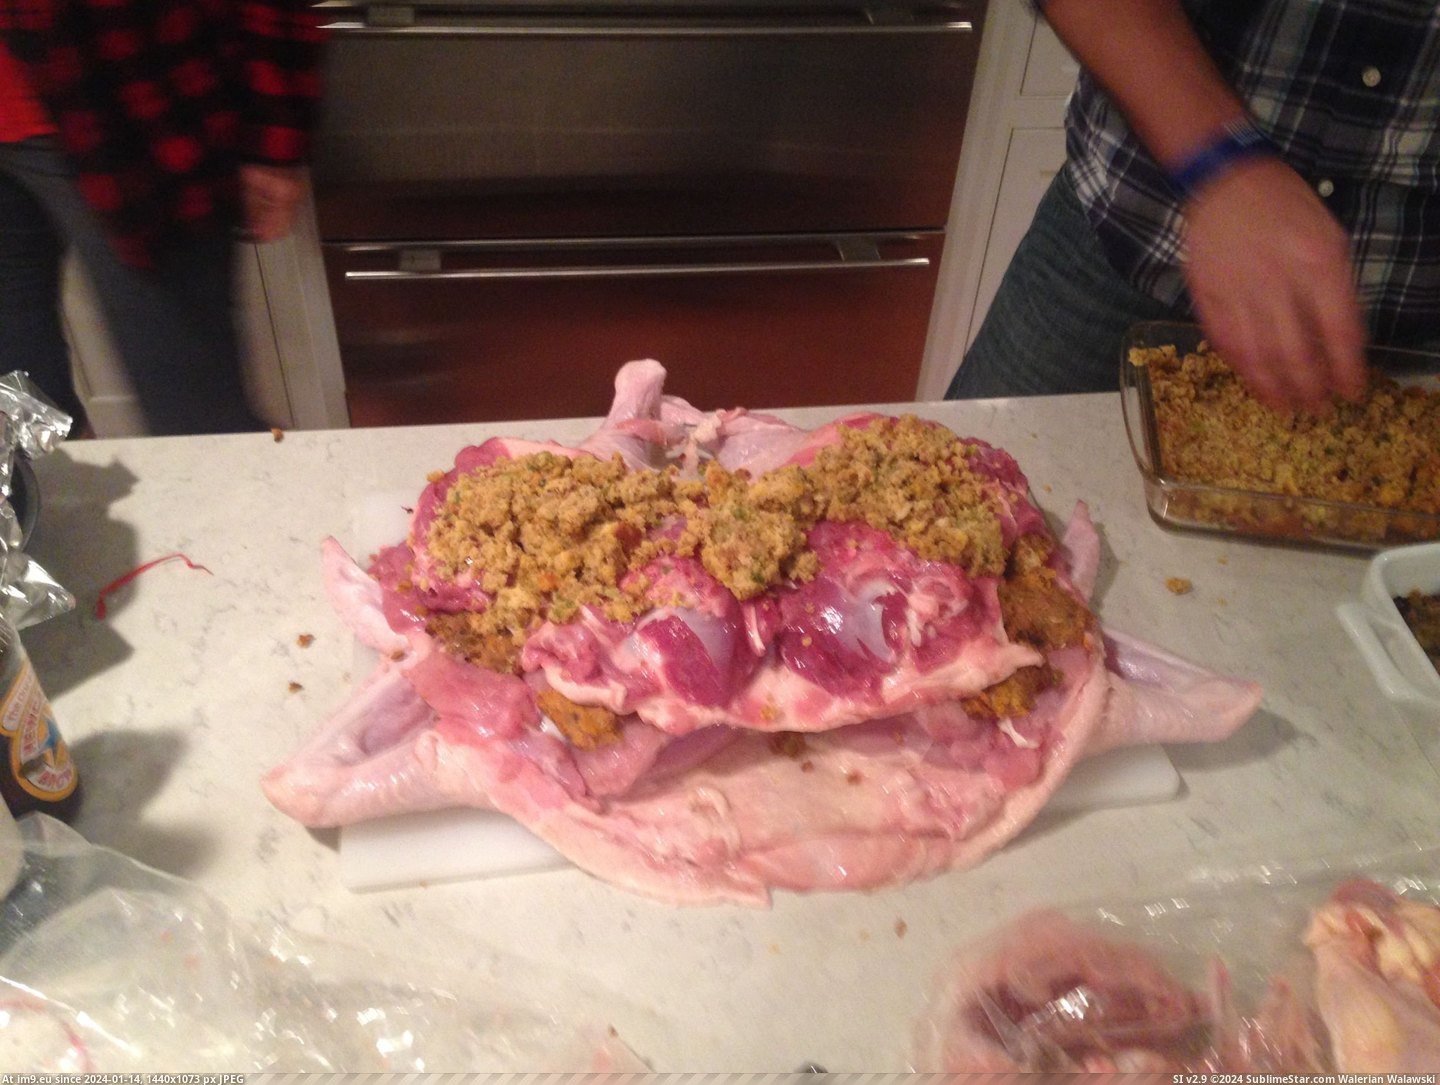 #For #Year #Thought #Duck #Thanksgiving #Turkey #Turducken #Family #See #Chicken [Pics] My family makes turducken (a chicken in a duck in a turkey) every year for Thanksgiving. Thought reddit would like to see Pic. (Image of album My r/PICS favs))